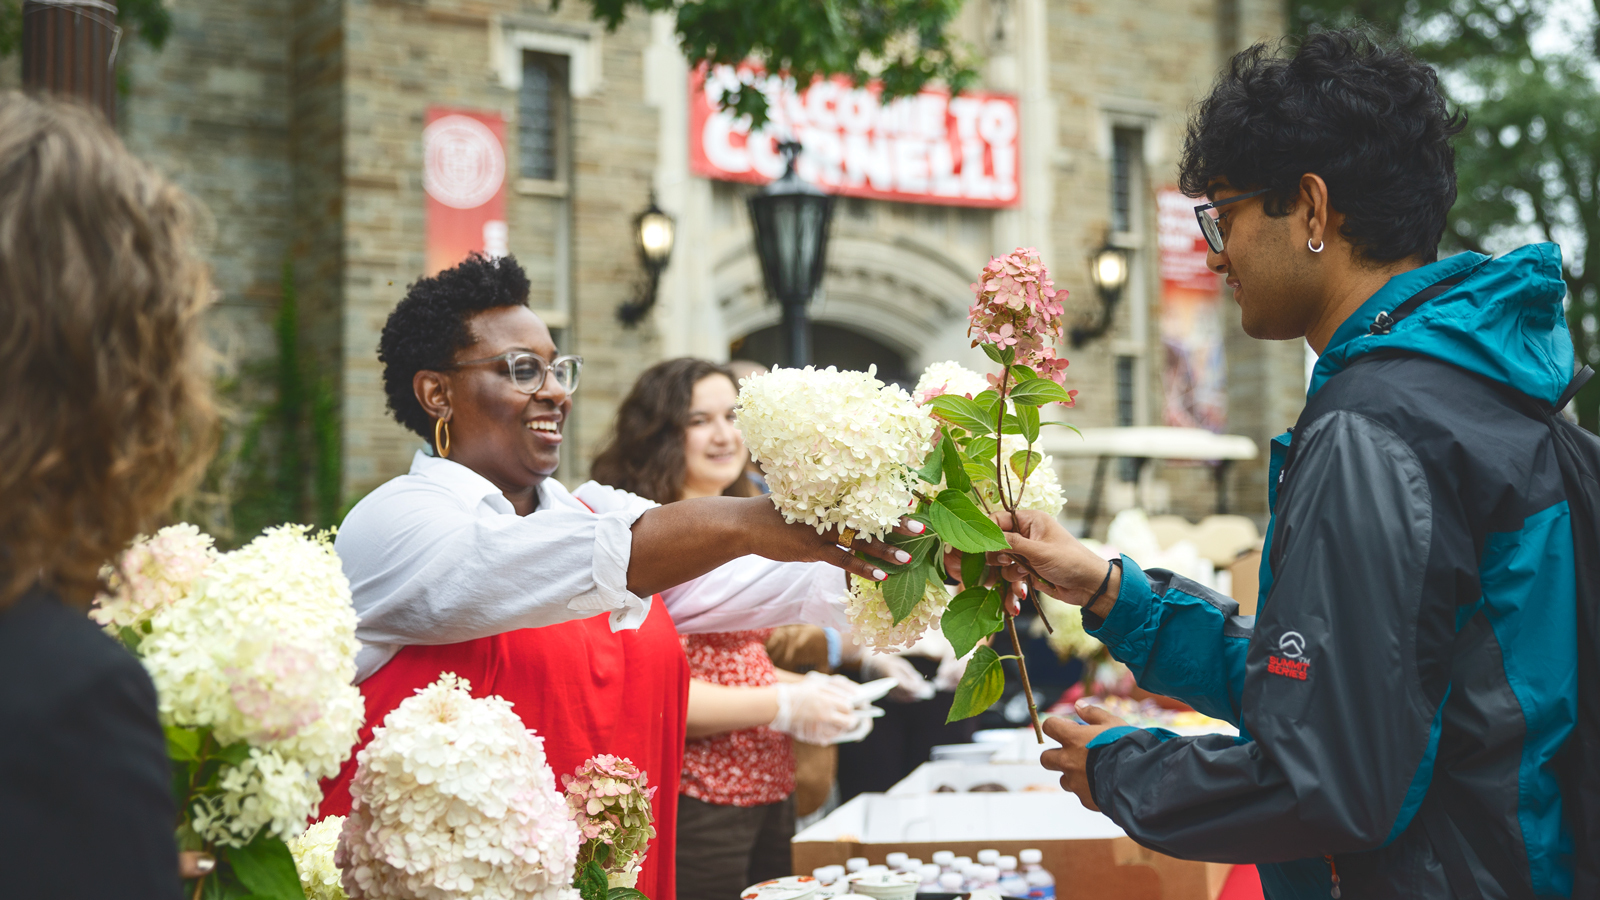 A woman hands a man a bouquet of white and pink hydrangea flowers at Cornell University.